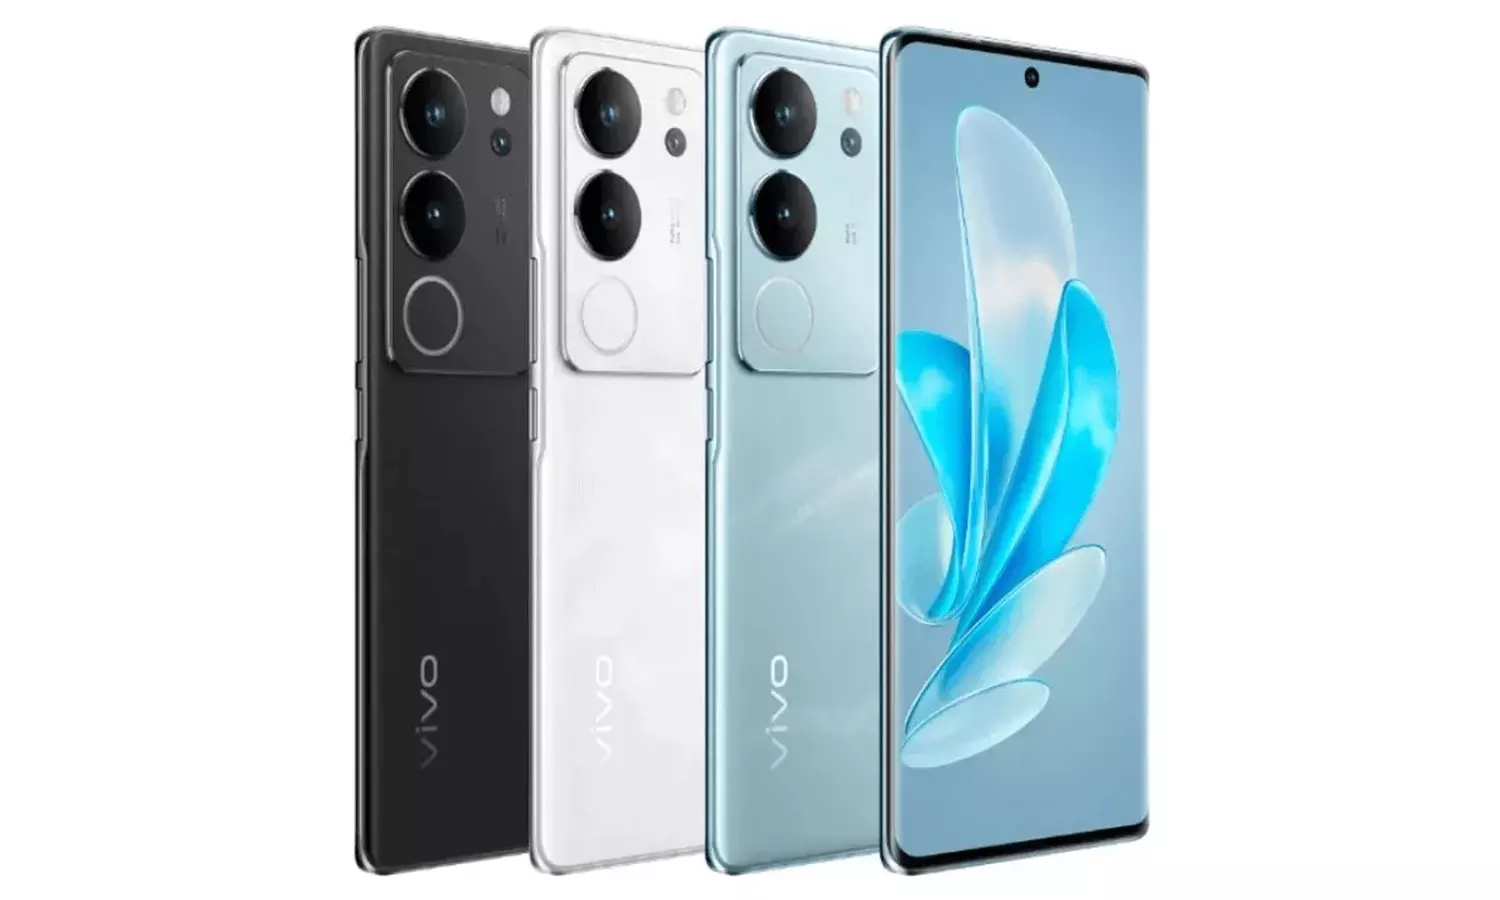 Vivo S18 And S18 Pro Specifications